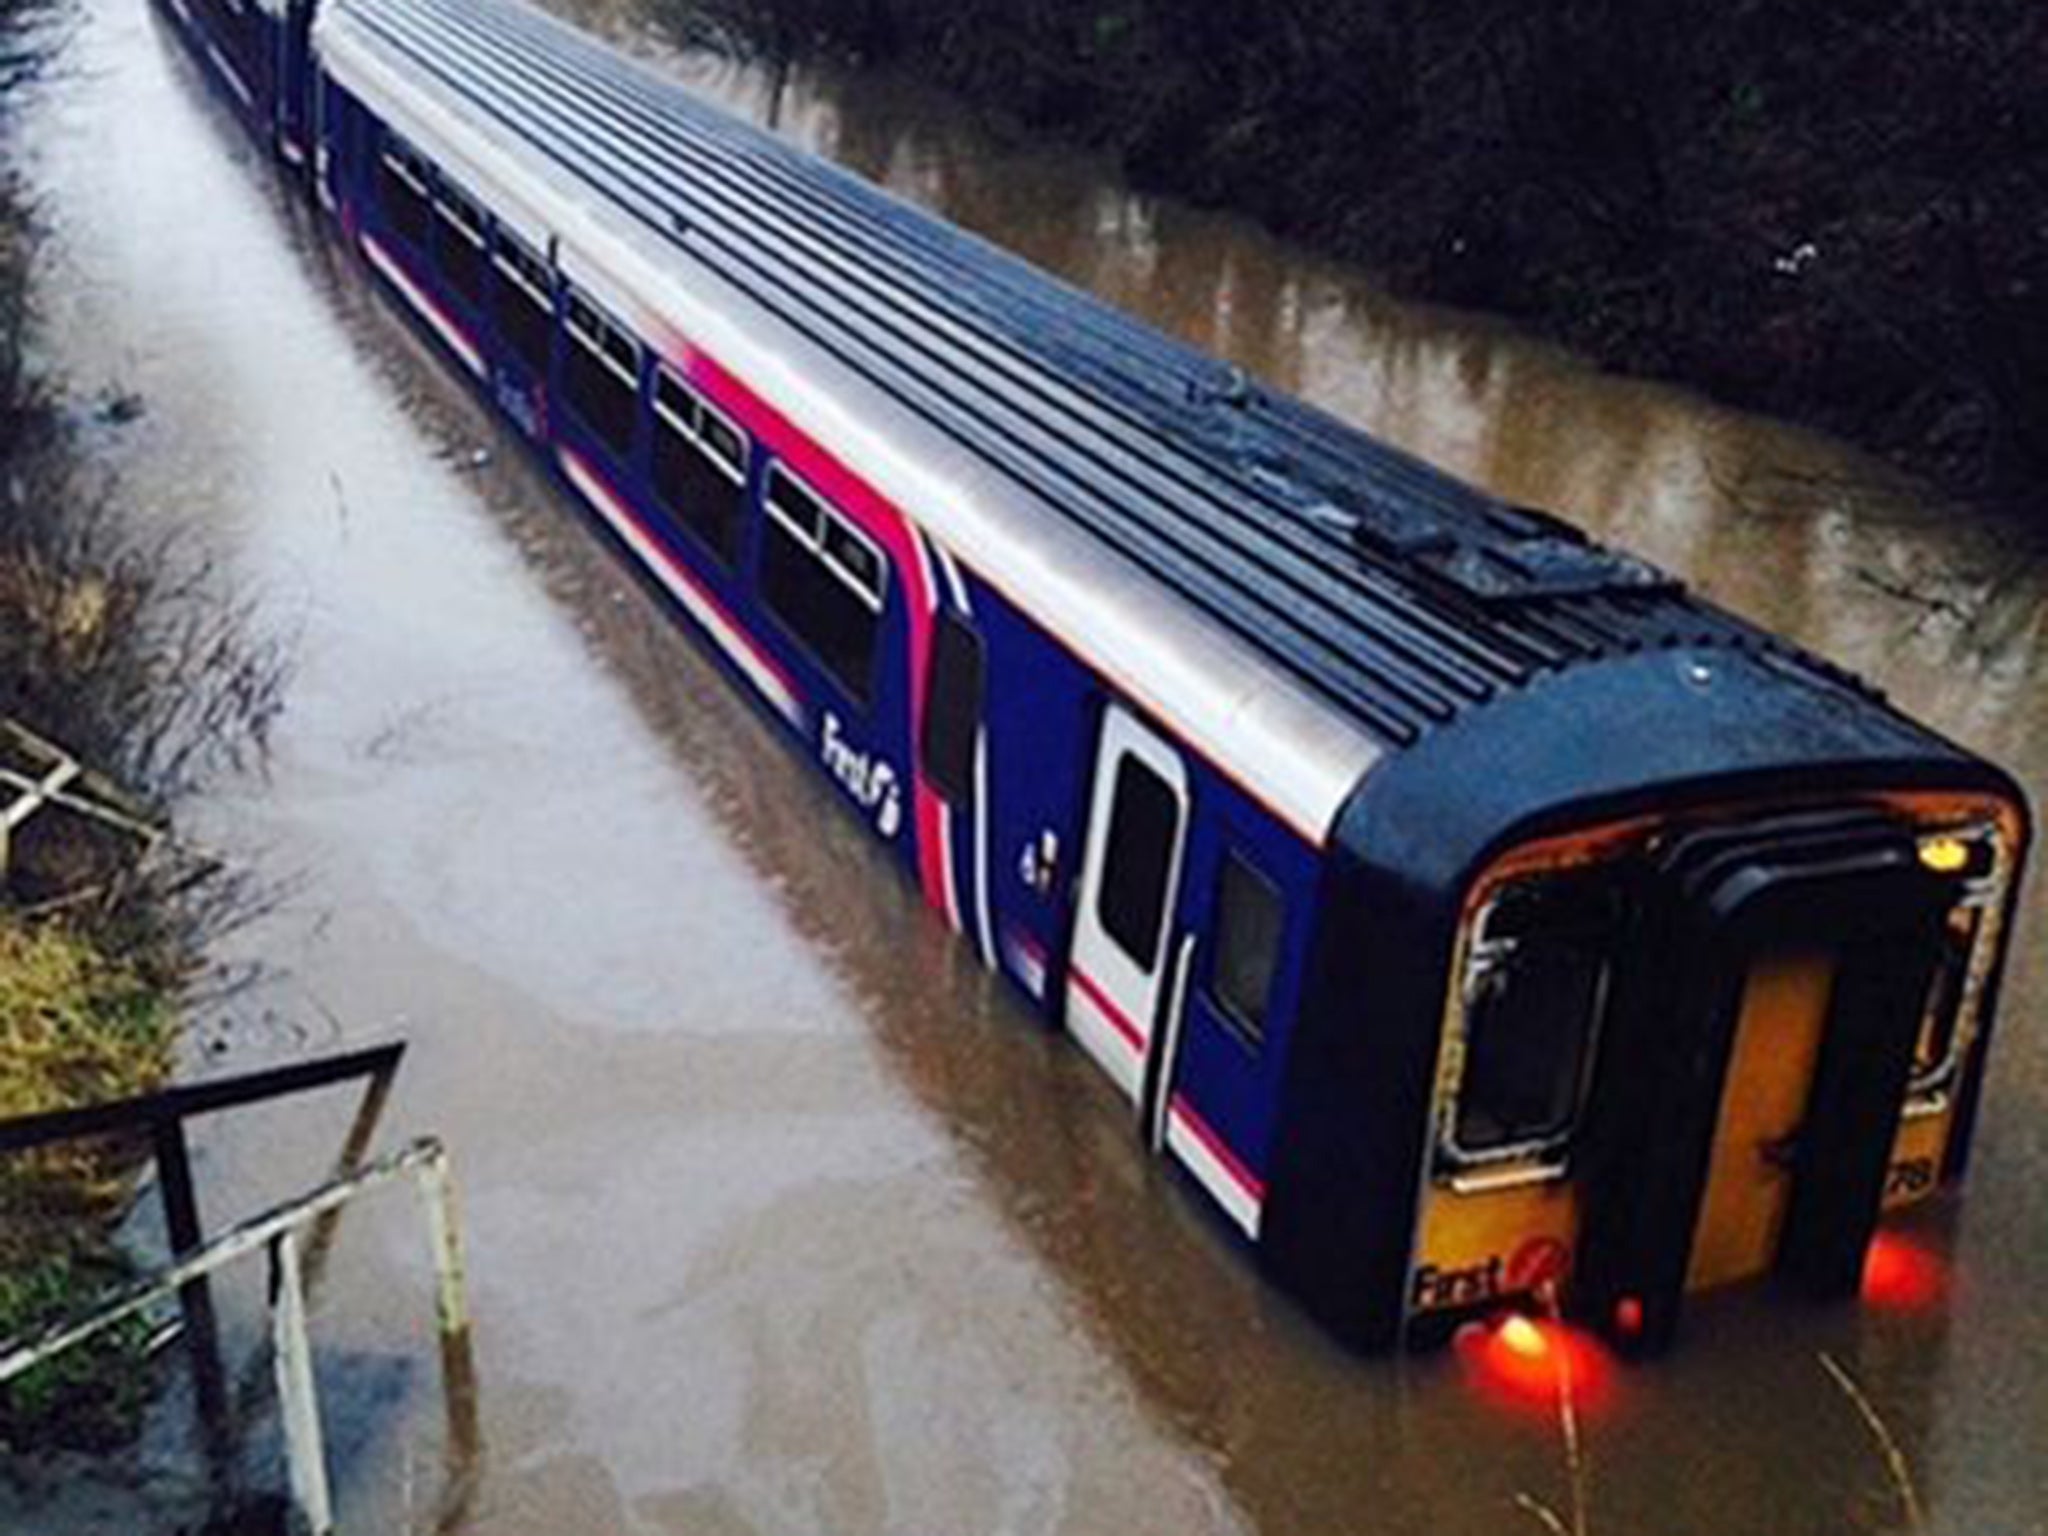 The Glasgow Central to Carlisle train on Monday after striking a large volume of water between Kilmarnock and Auchinleck, as the River Irvine burst its banks